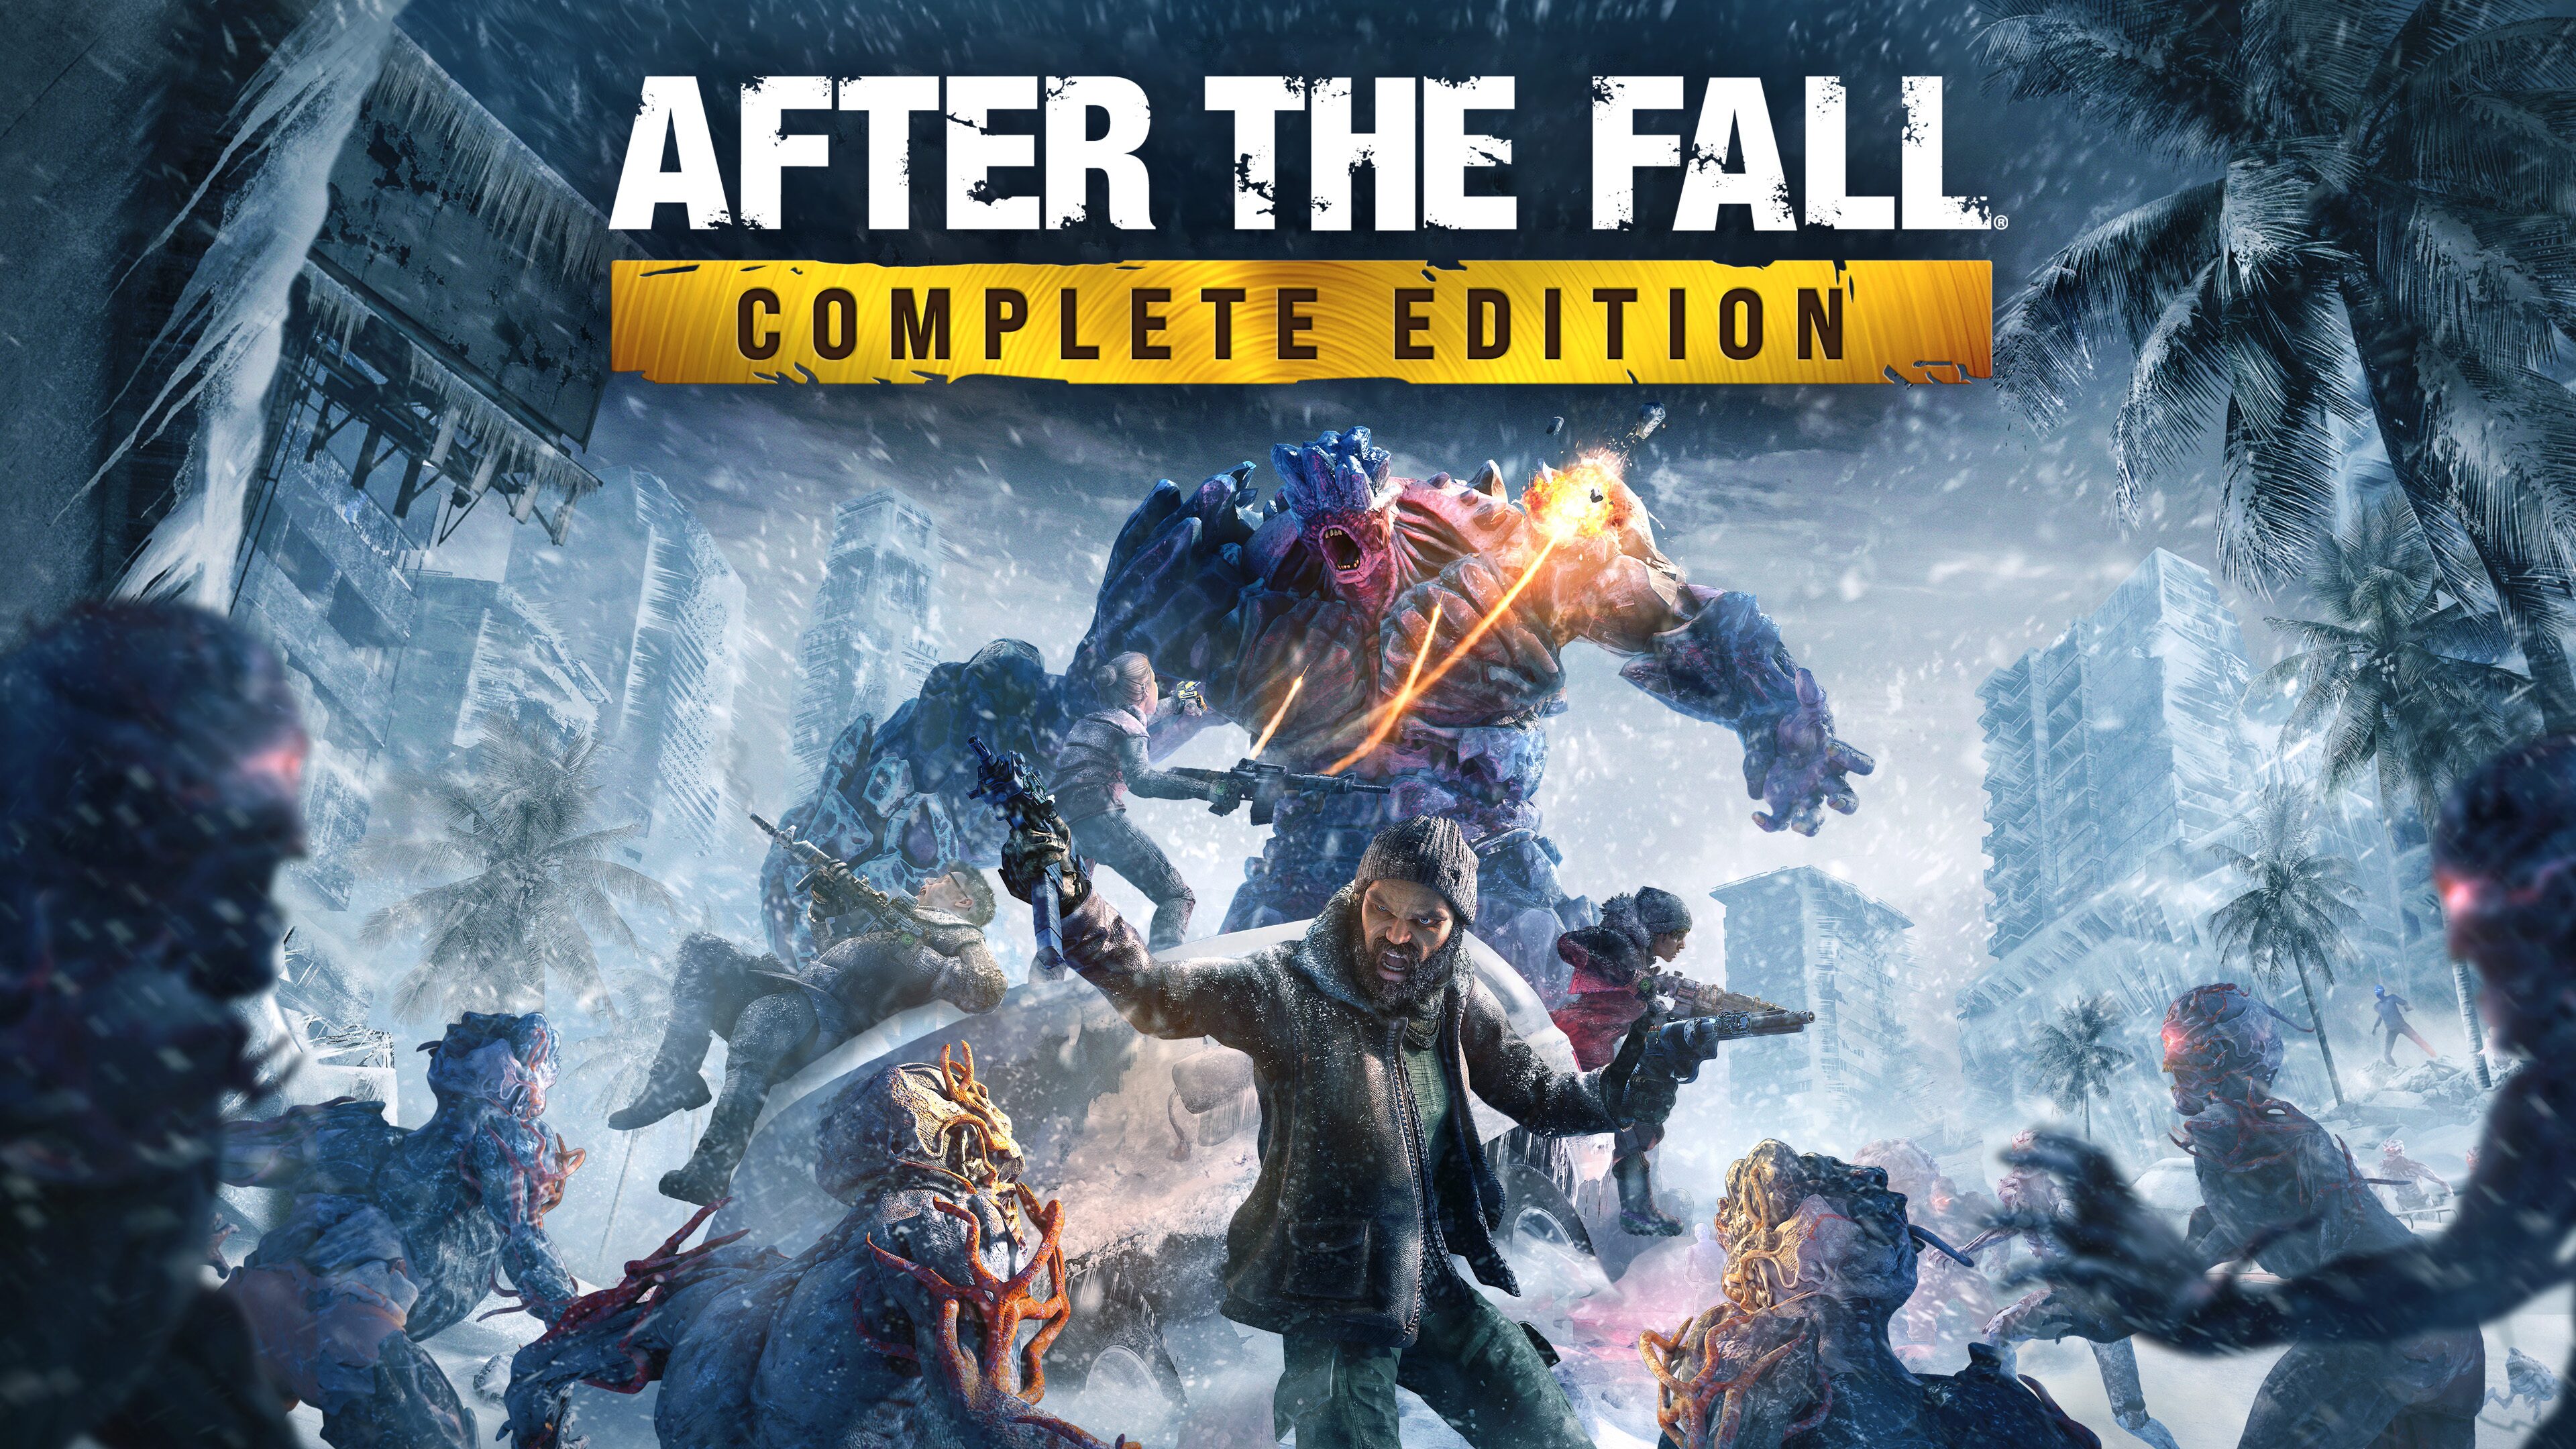 After the fall vr. After the Fall® - complete Edition. Лучшие VR игры для ПС 4. After the Fall VR диск.